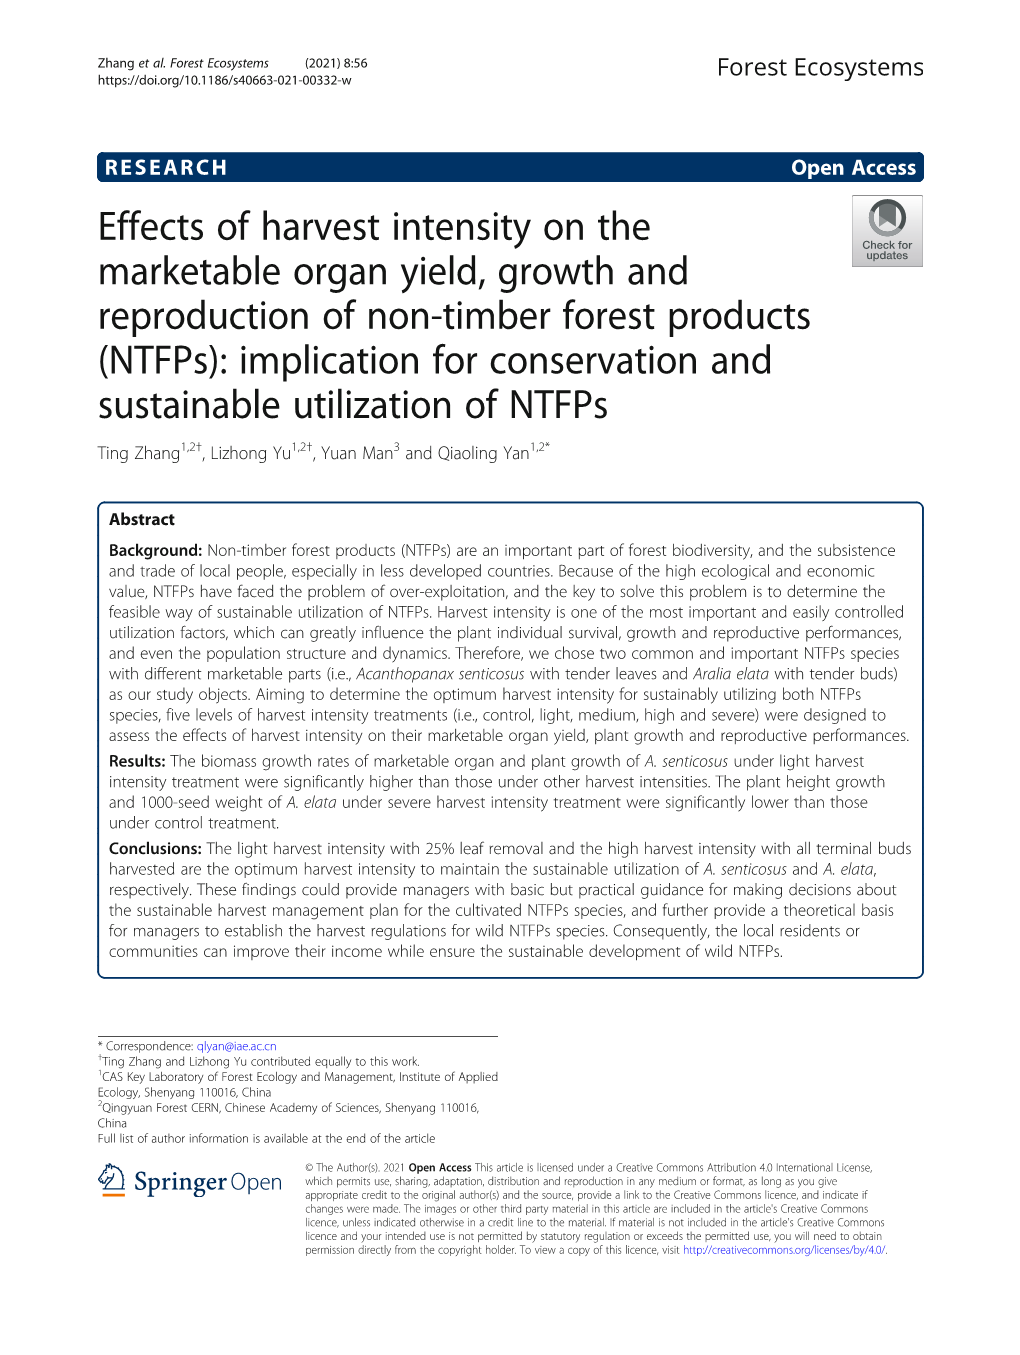 Effects of Harvest Intensity on the Marketable Organ Yield, Growth And